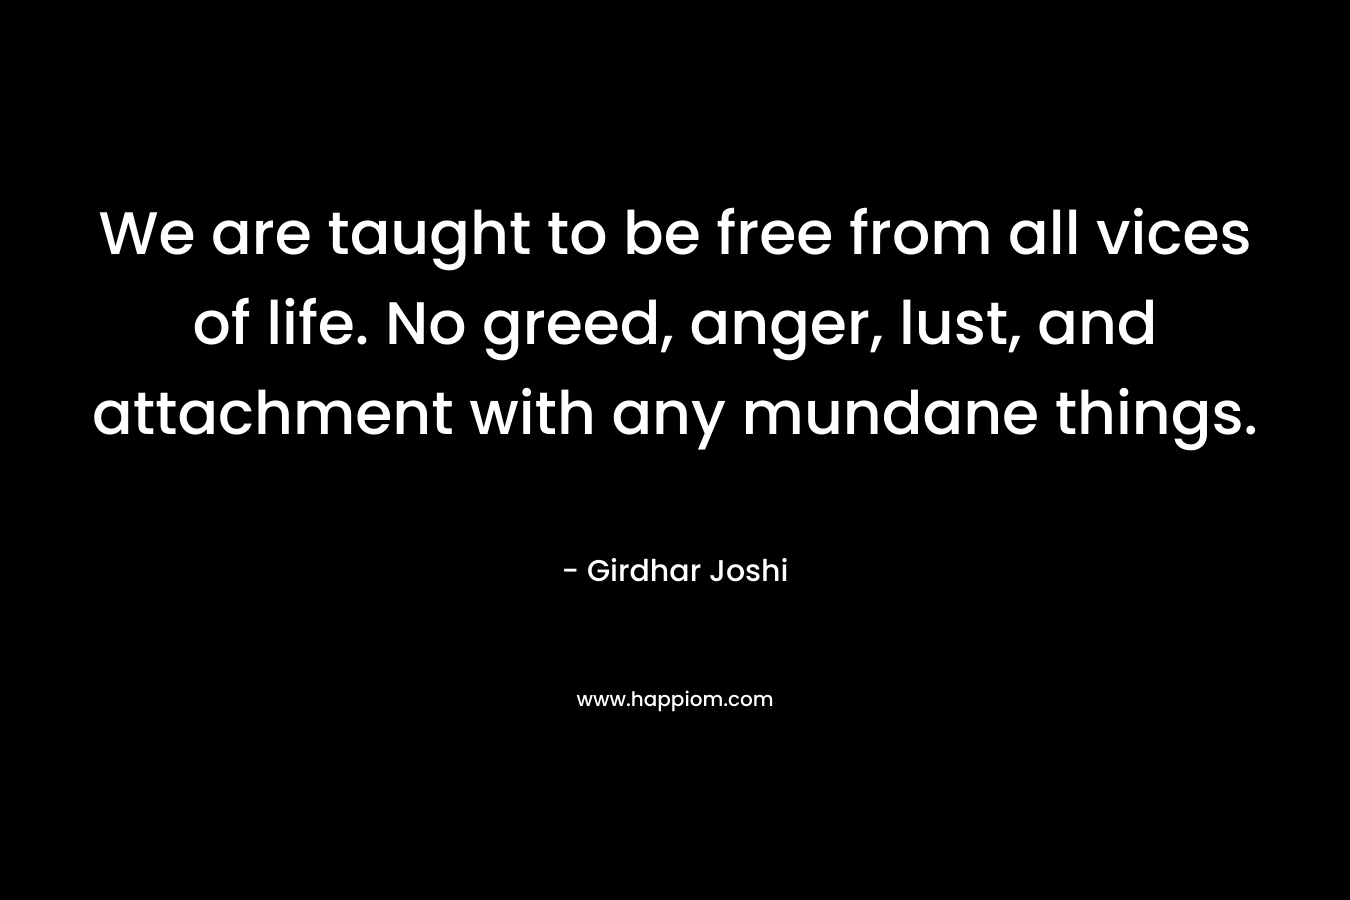 We are taught to be free from all vices of life. No greed, anger, lust, and attachment with any mundane things. – Girdhar Joshi